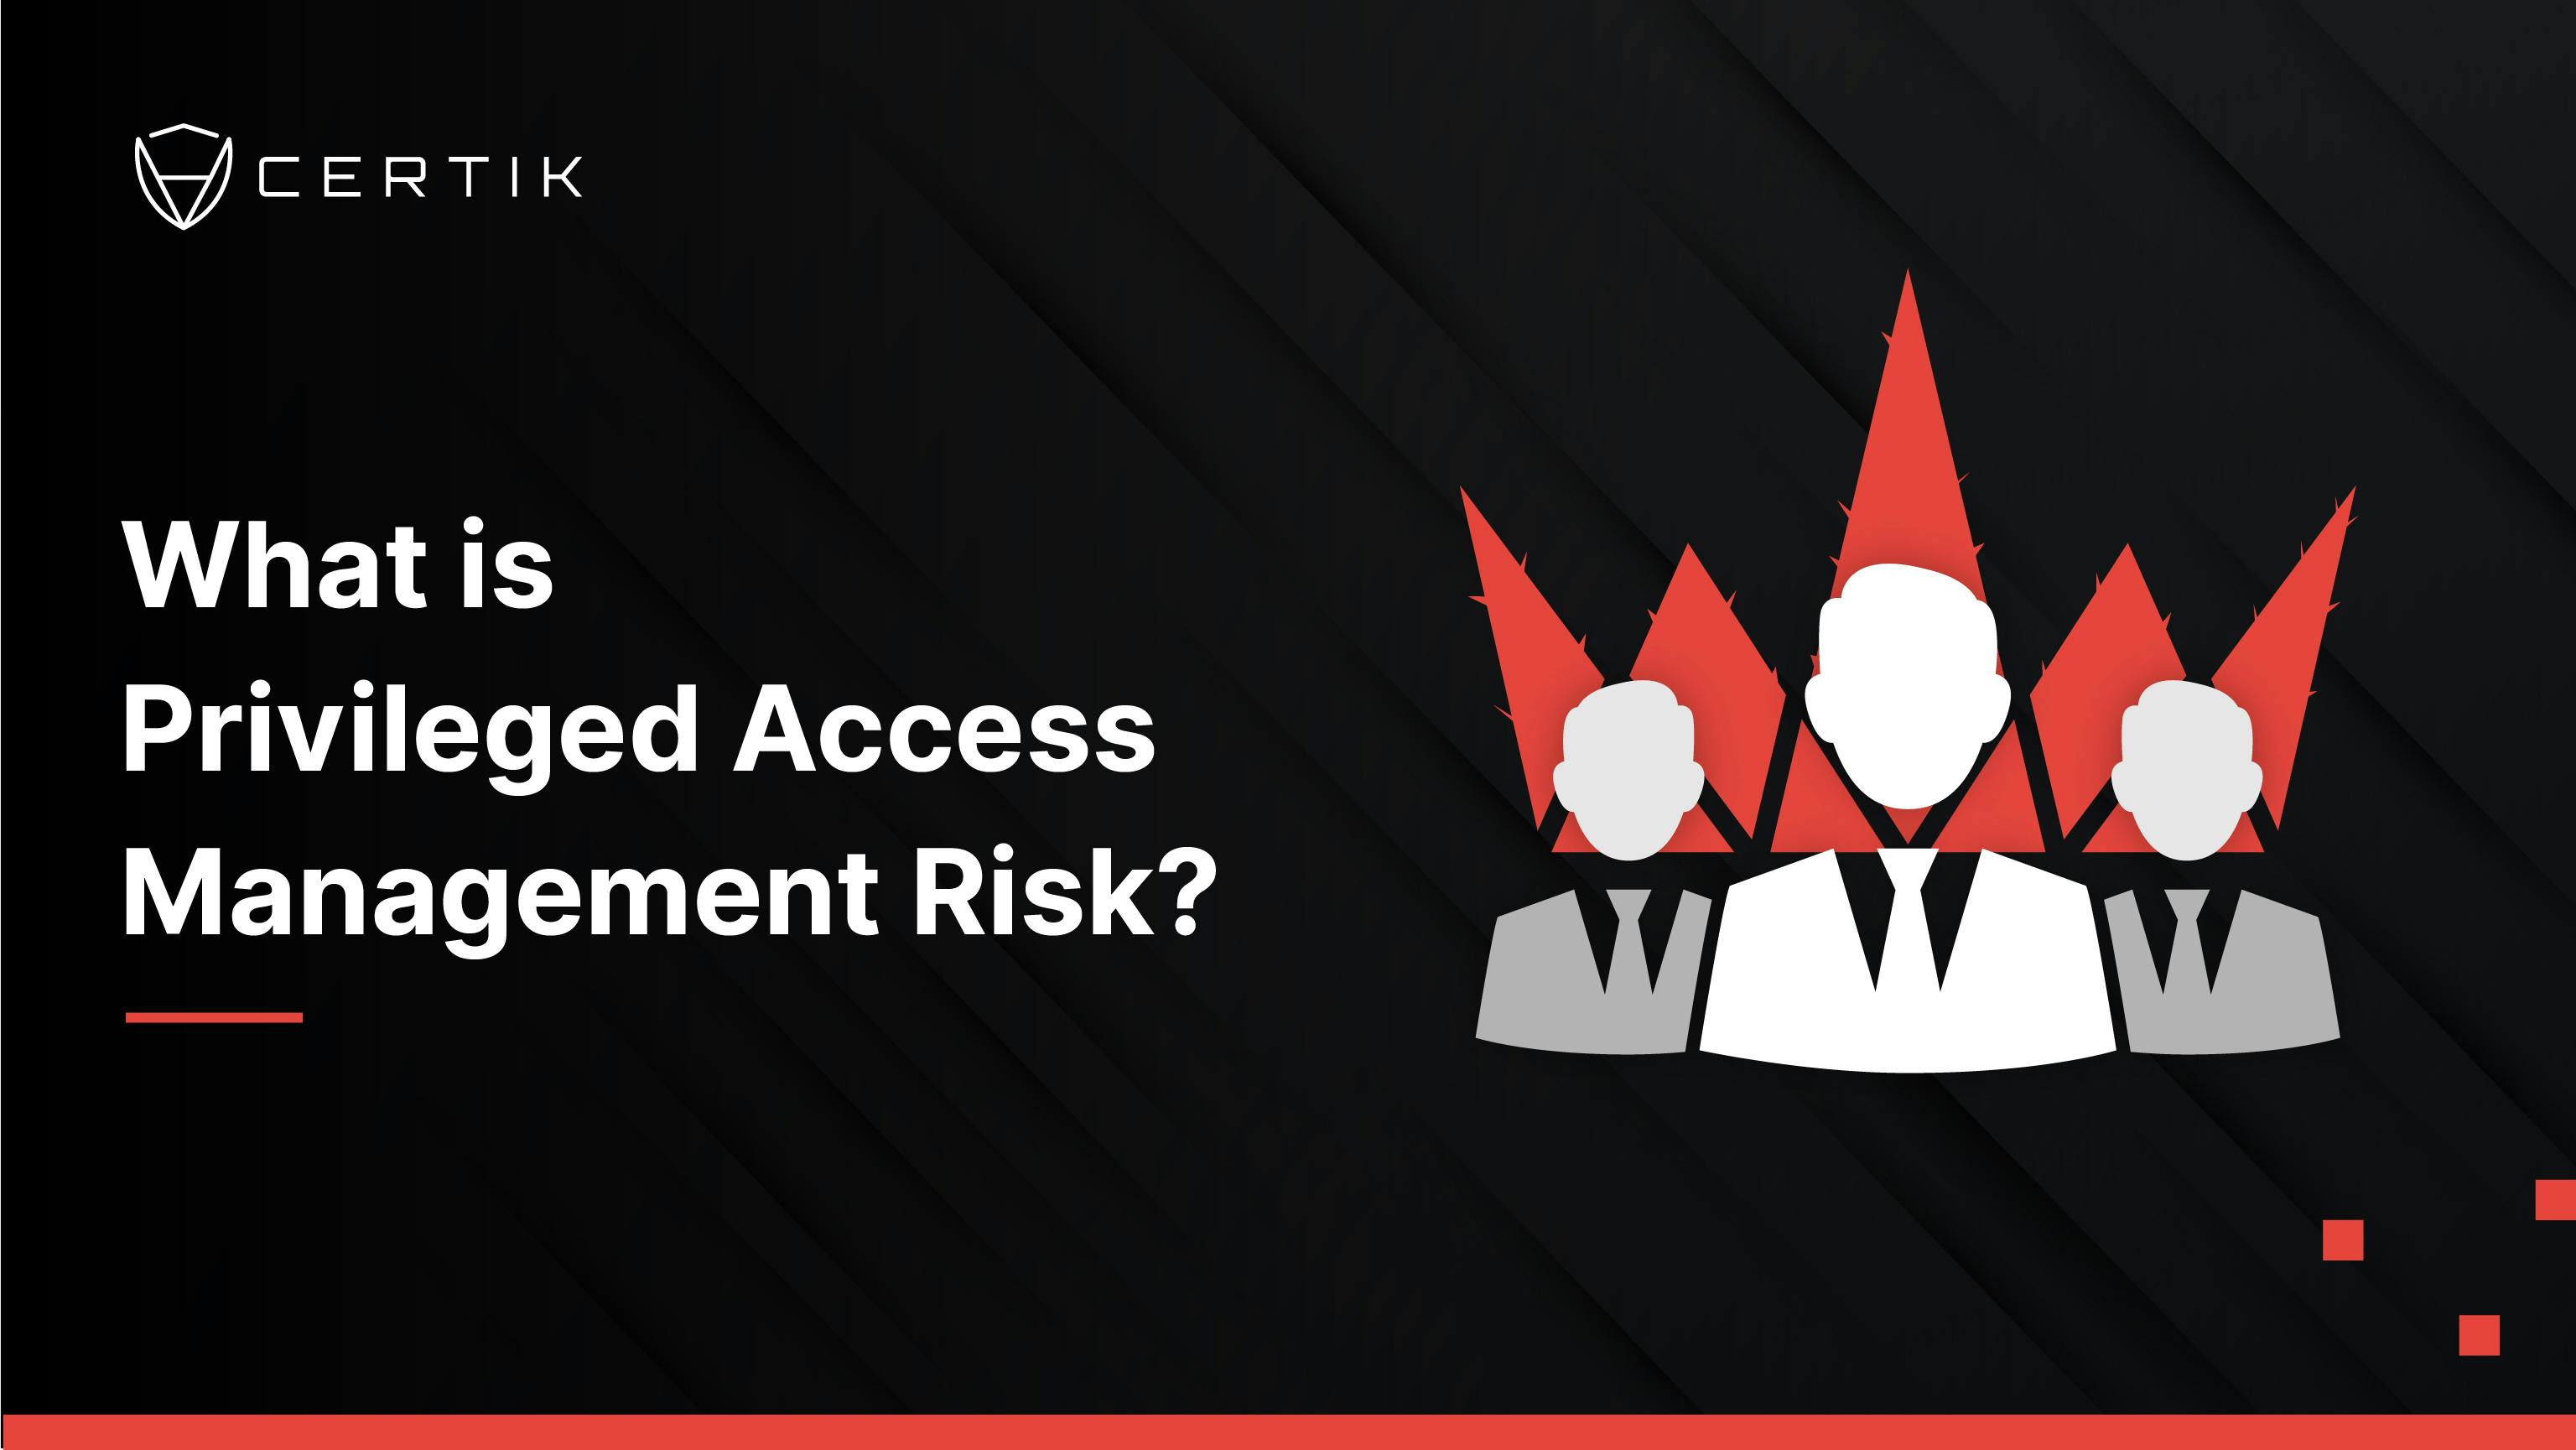 What is Privileged Access Management Risk?